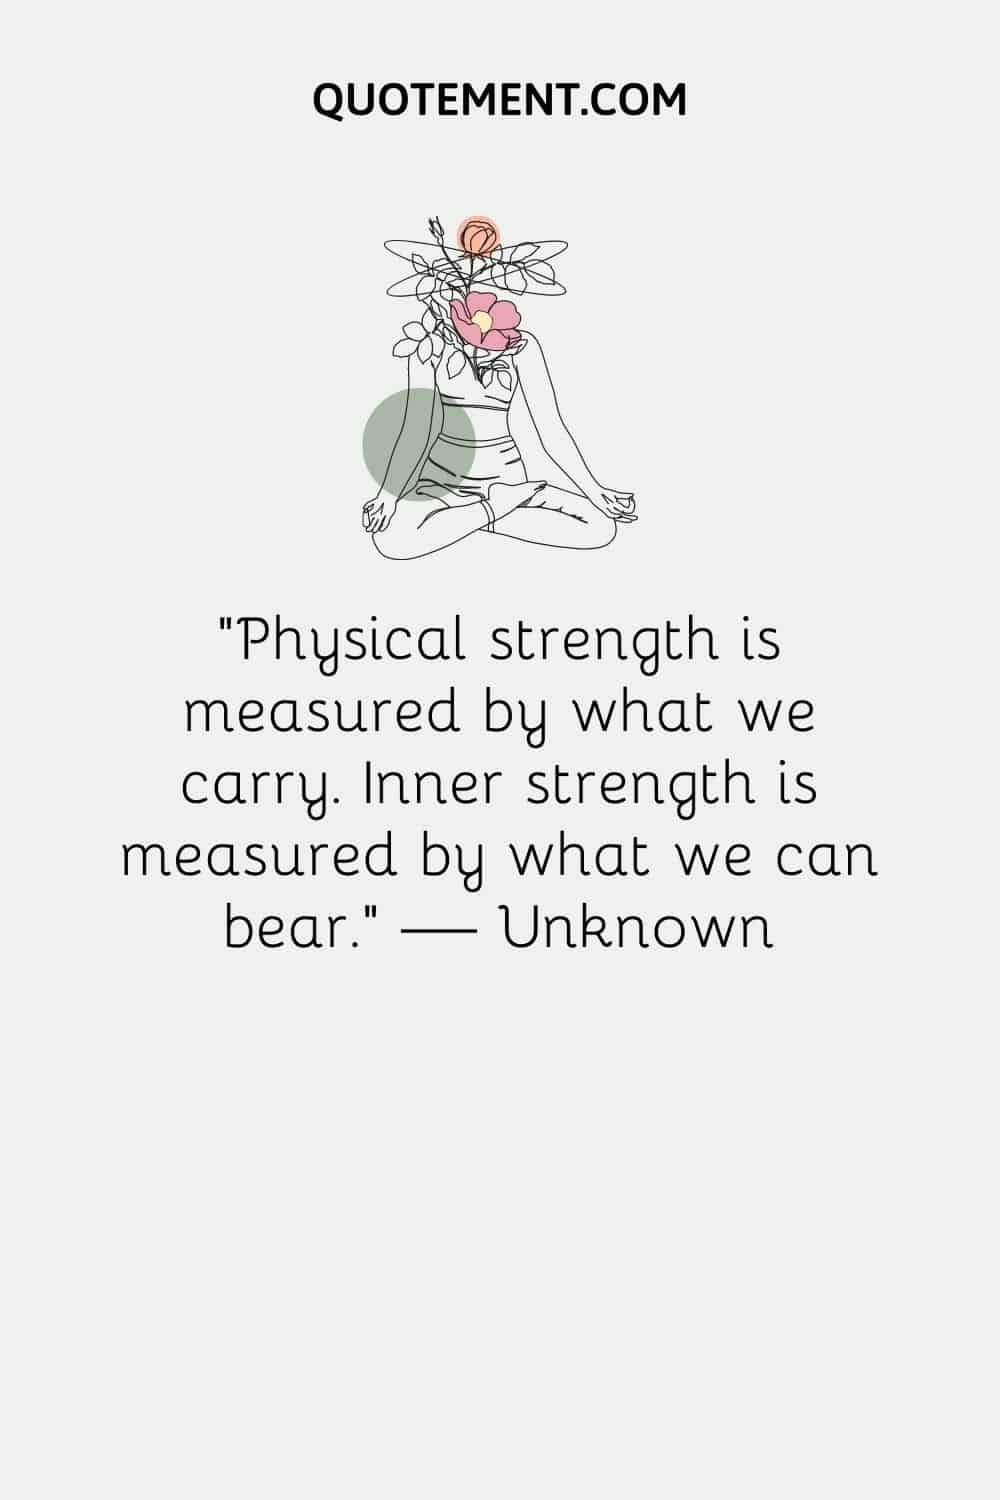 “Physical strength is measured by what we carry. Inner strength is measured by what we can bear.” — Unknown